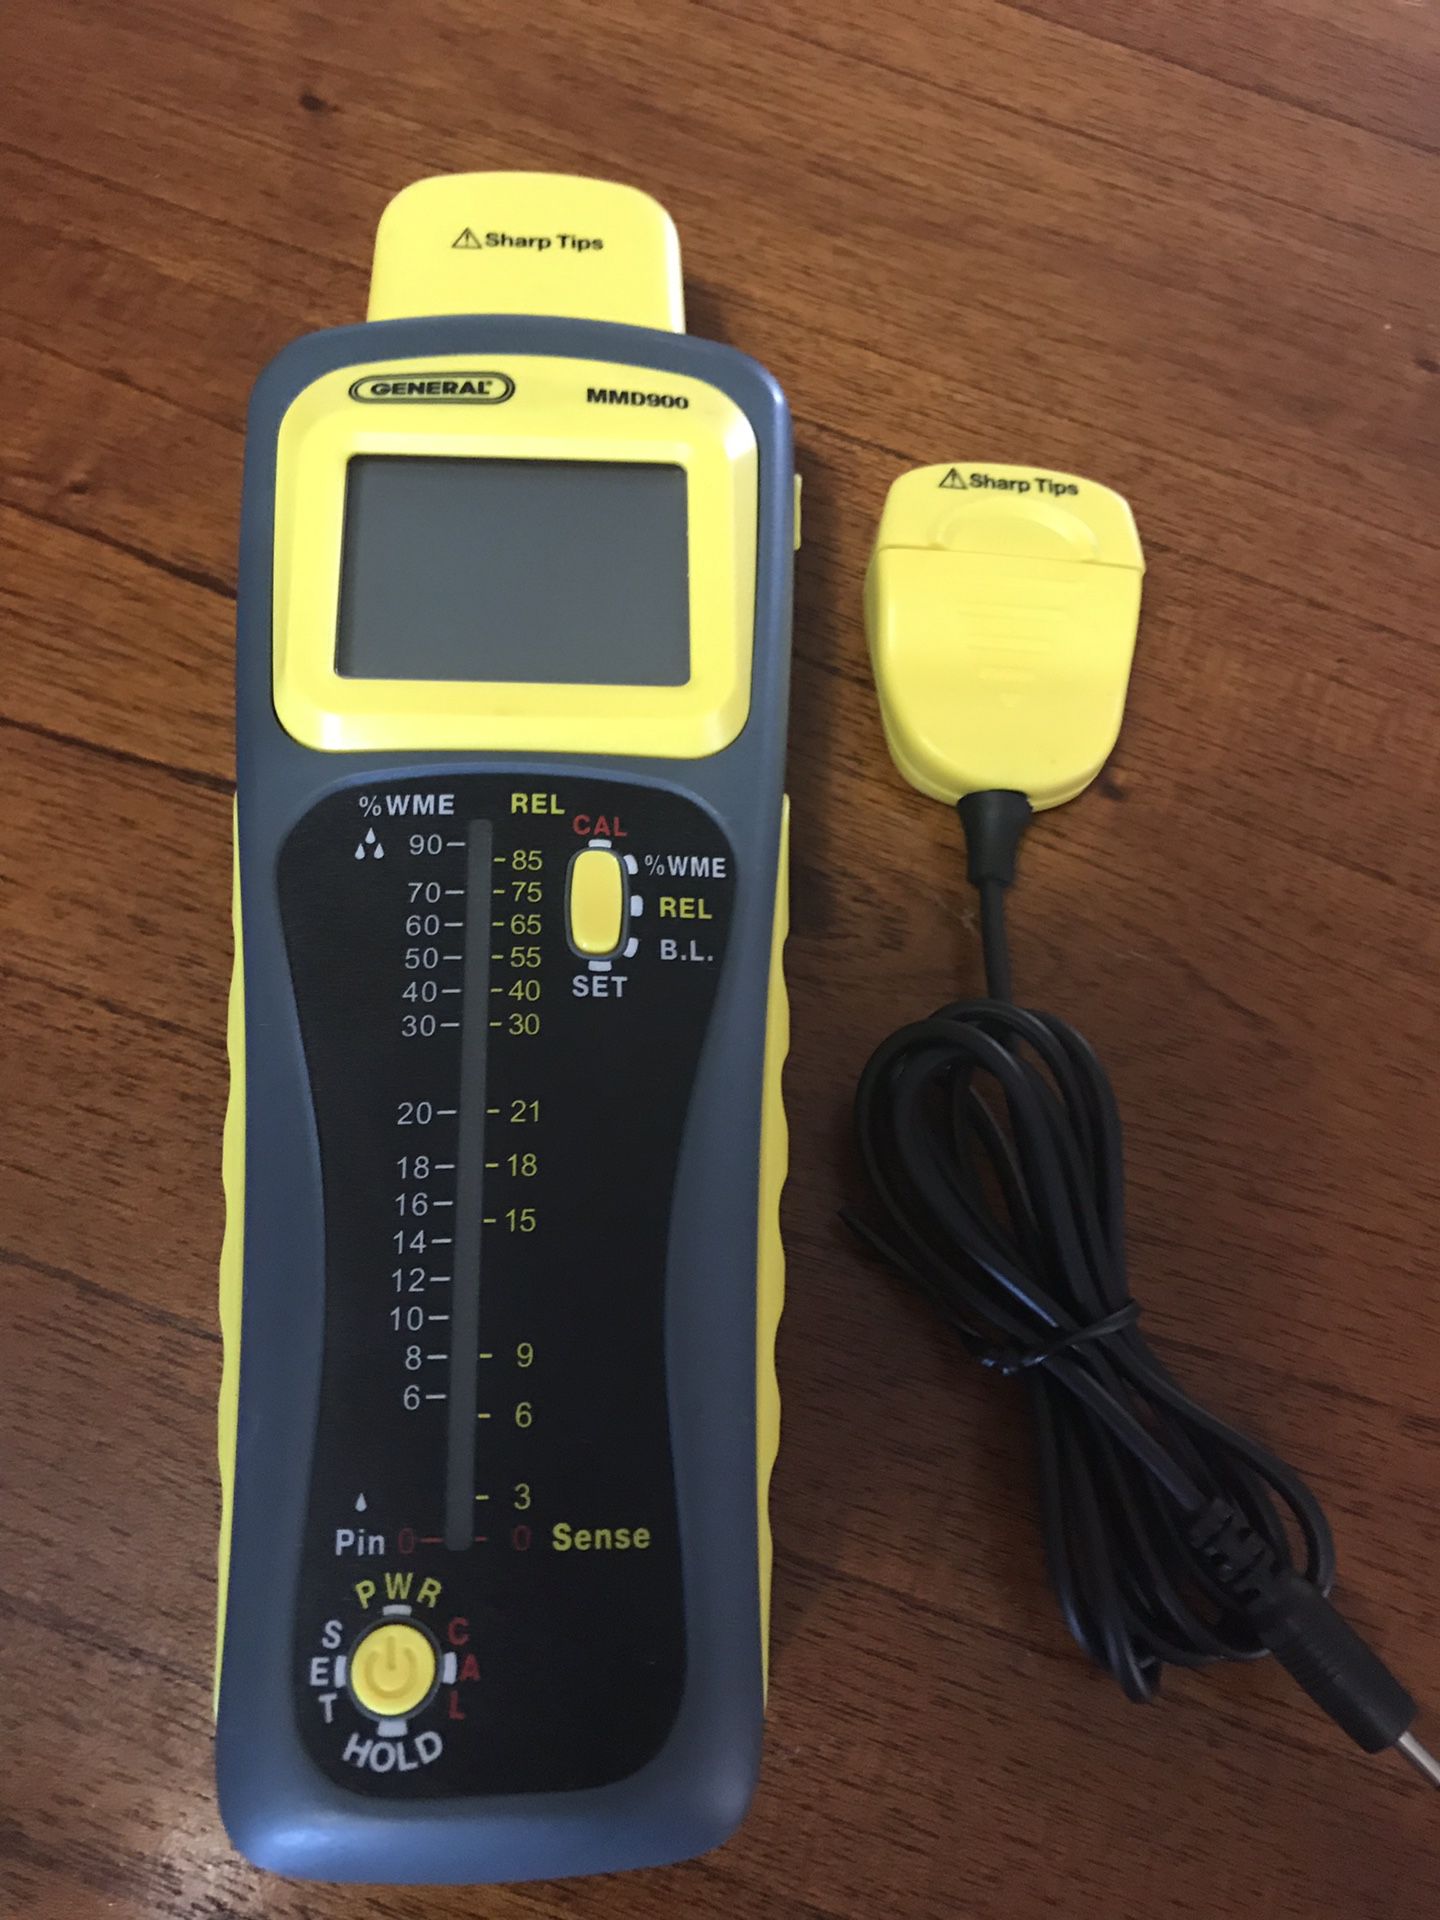 NEW General MMD900 Moisture Meter • Trades PayPal & Credit Cards Welcome